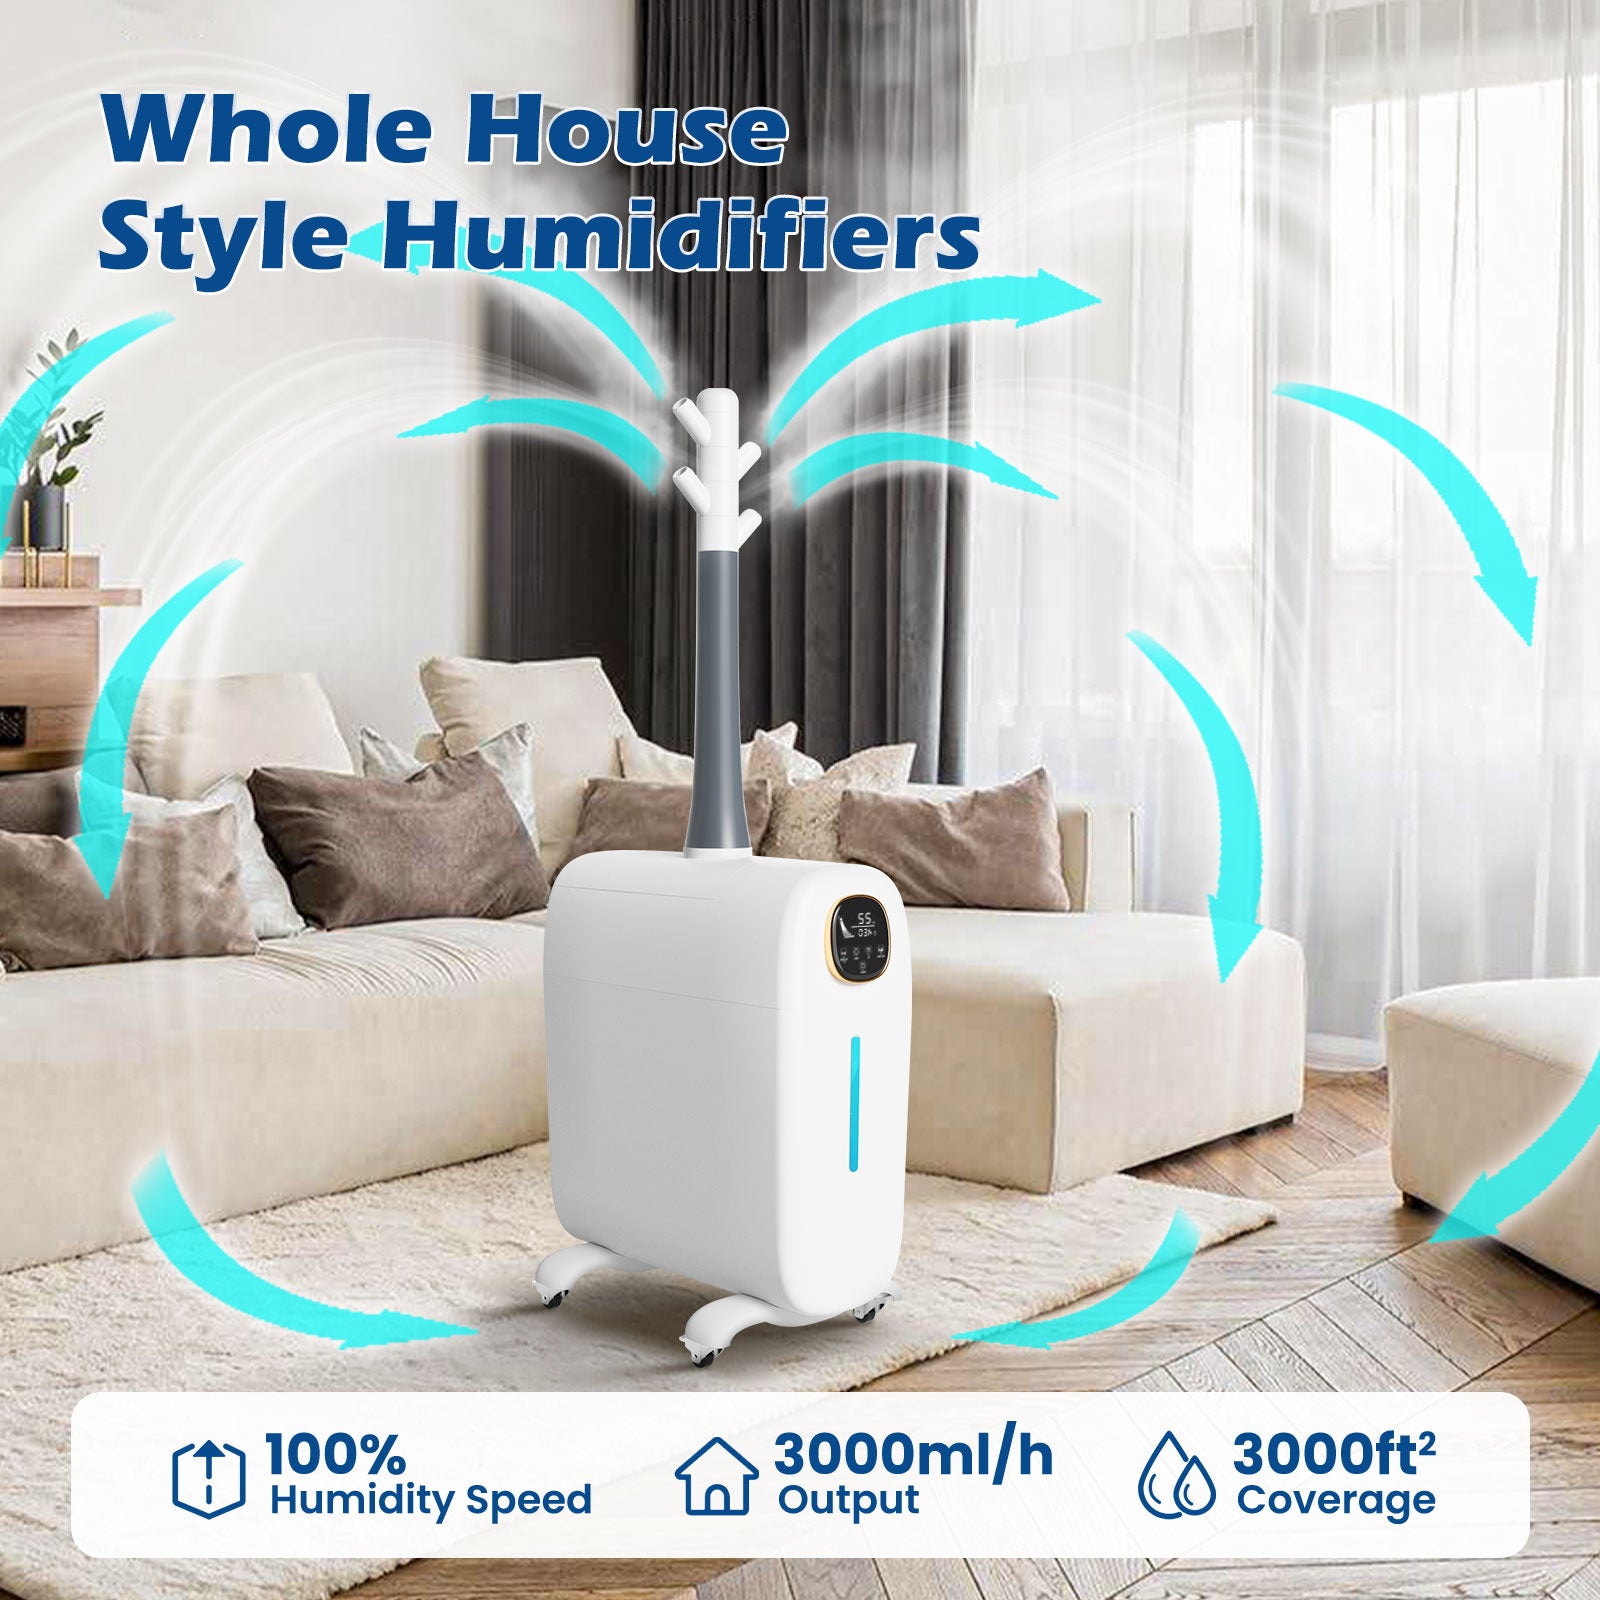 [LCD-J39]6.6gal/25L Large Humidifier Whole-House Commercial and Industrial Humidifier 3000 sq.ft, Cool Mist Top Fill Humidifier Floor Humidifiers 2000ML/H Branch Tube Design with 360° Nozzle Sets